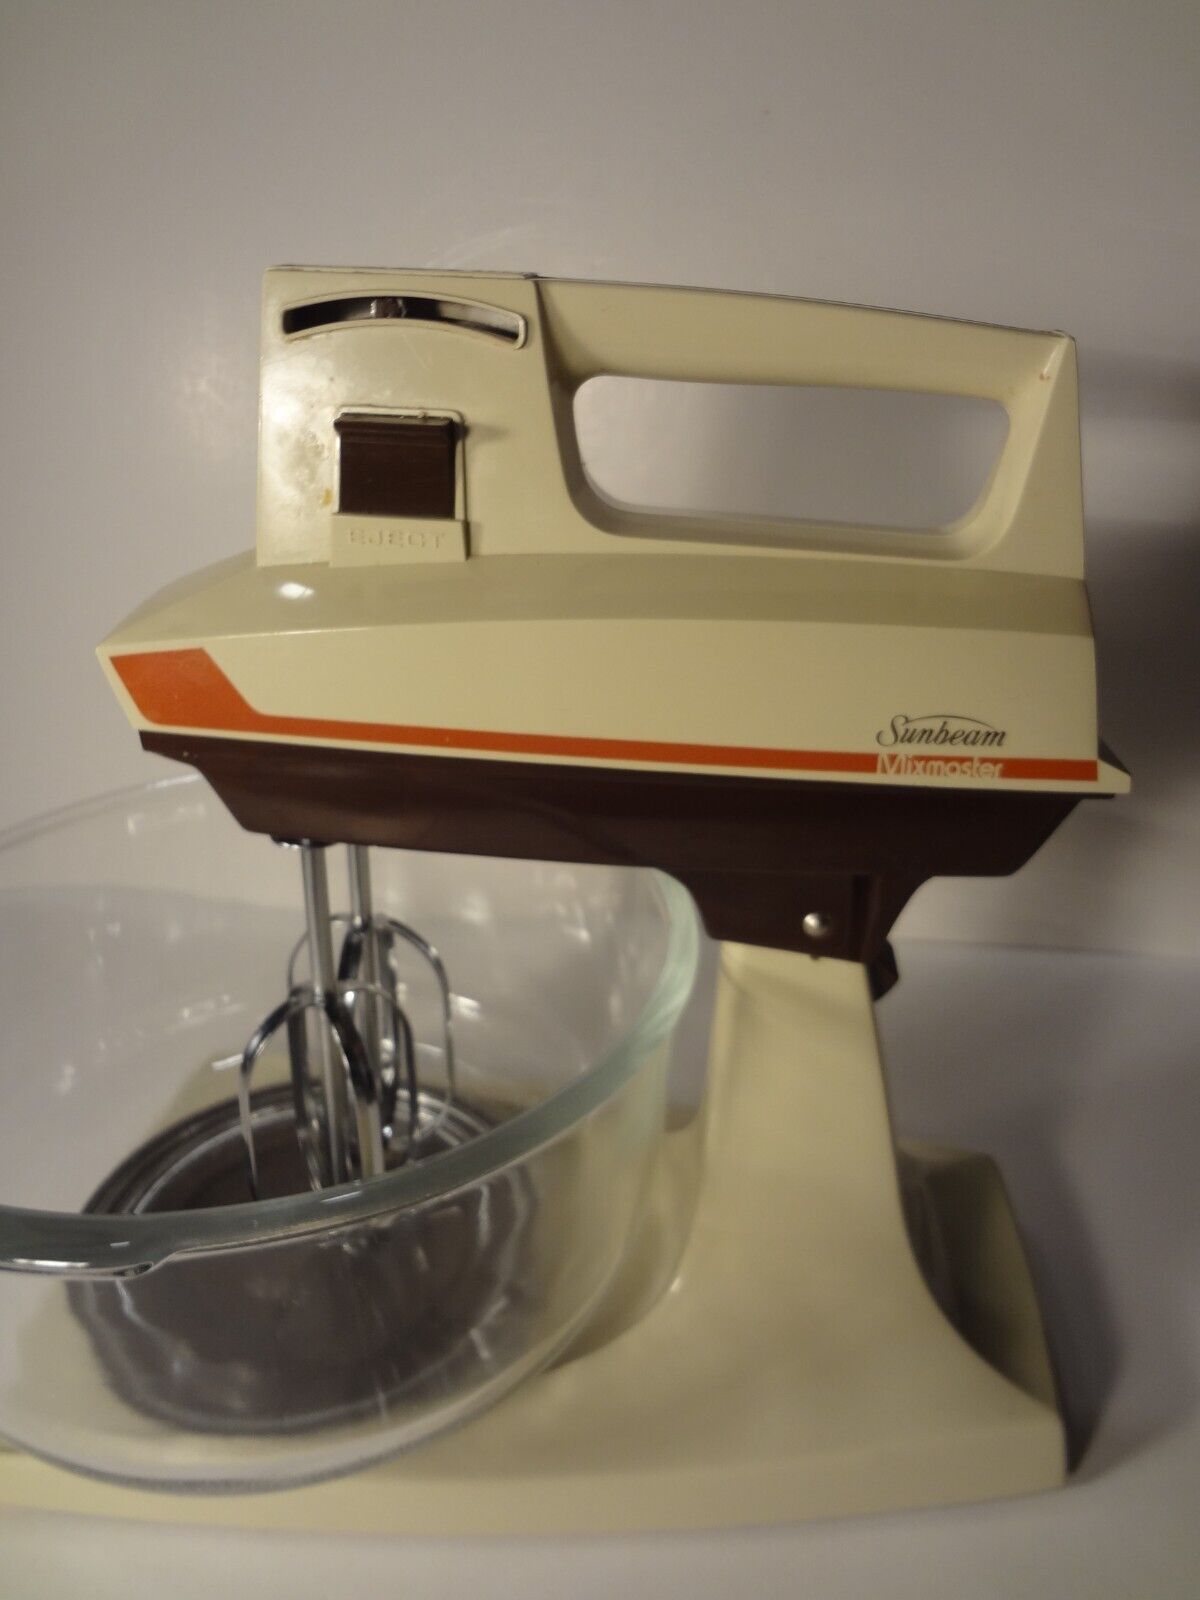 Sunbeam Mixmaster Model 10 Ten Speed Stand Mixer With Beaters & Bowl Vintage